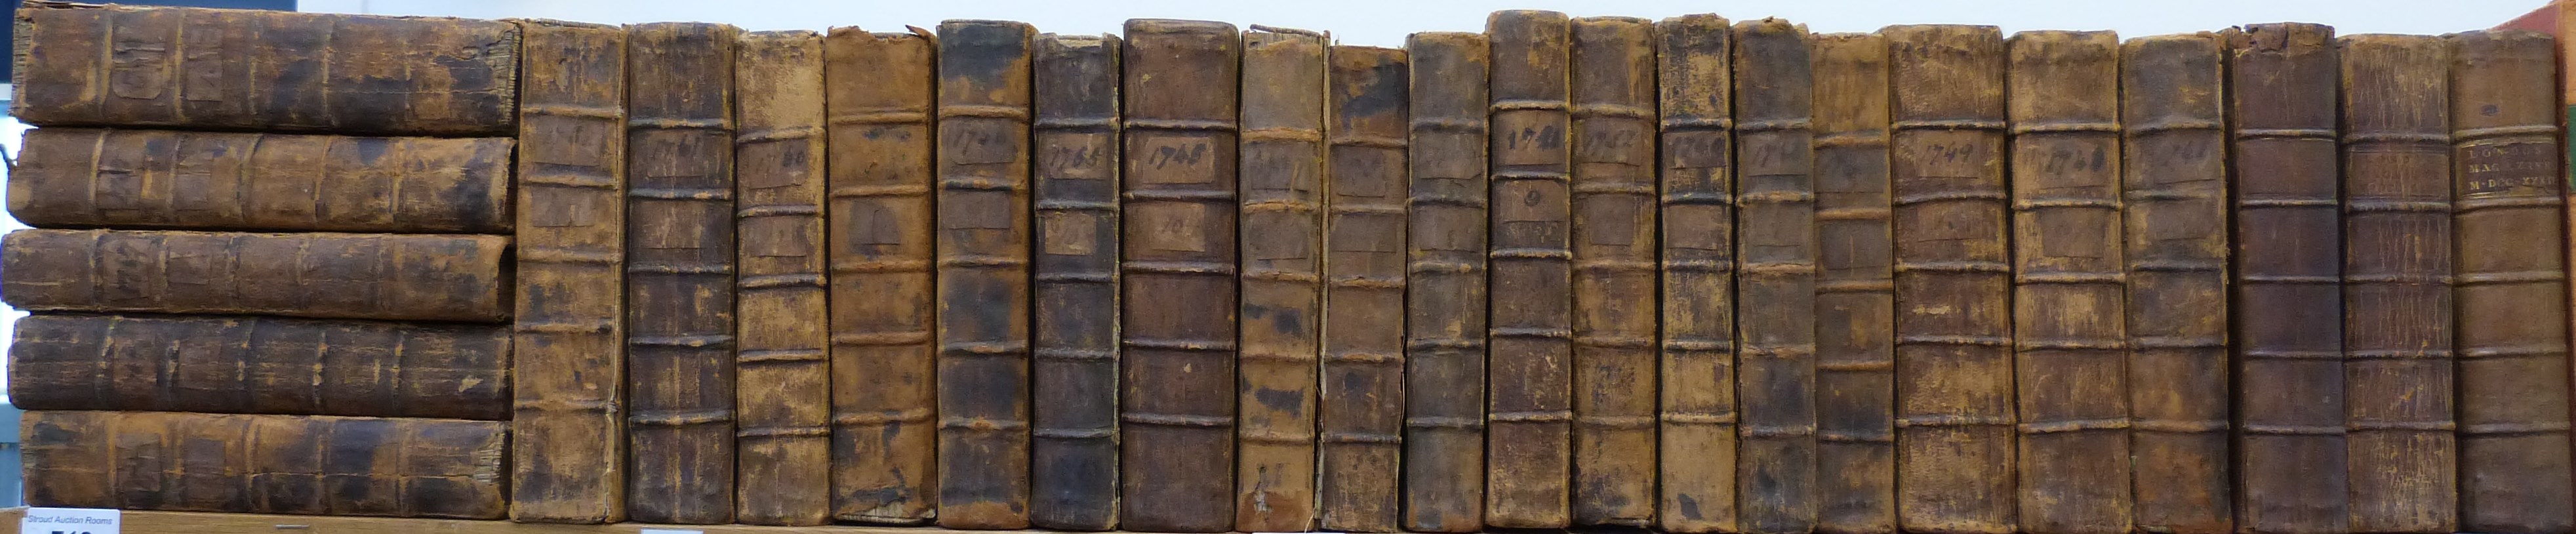 The London Magazine. Run Of Mid 18Th Century Volumes Mostly In Cambridge Panelled Calf Bindings Approx 30. Sold For £1,100